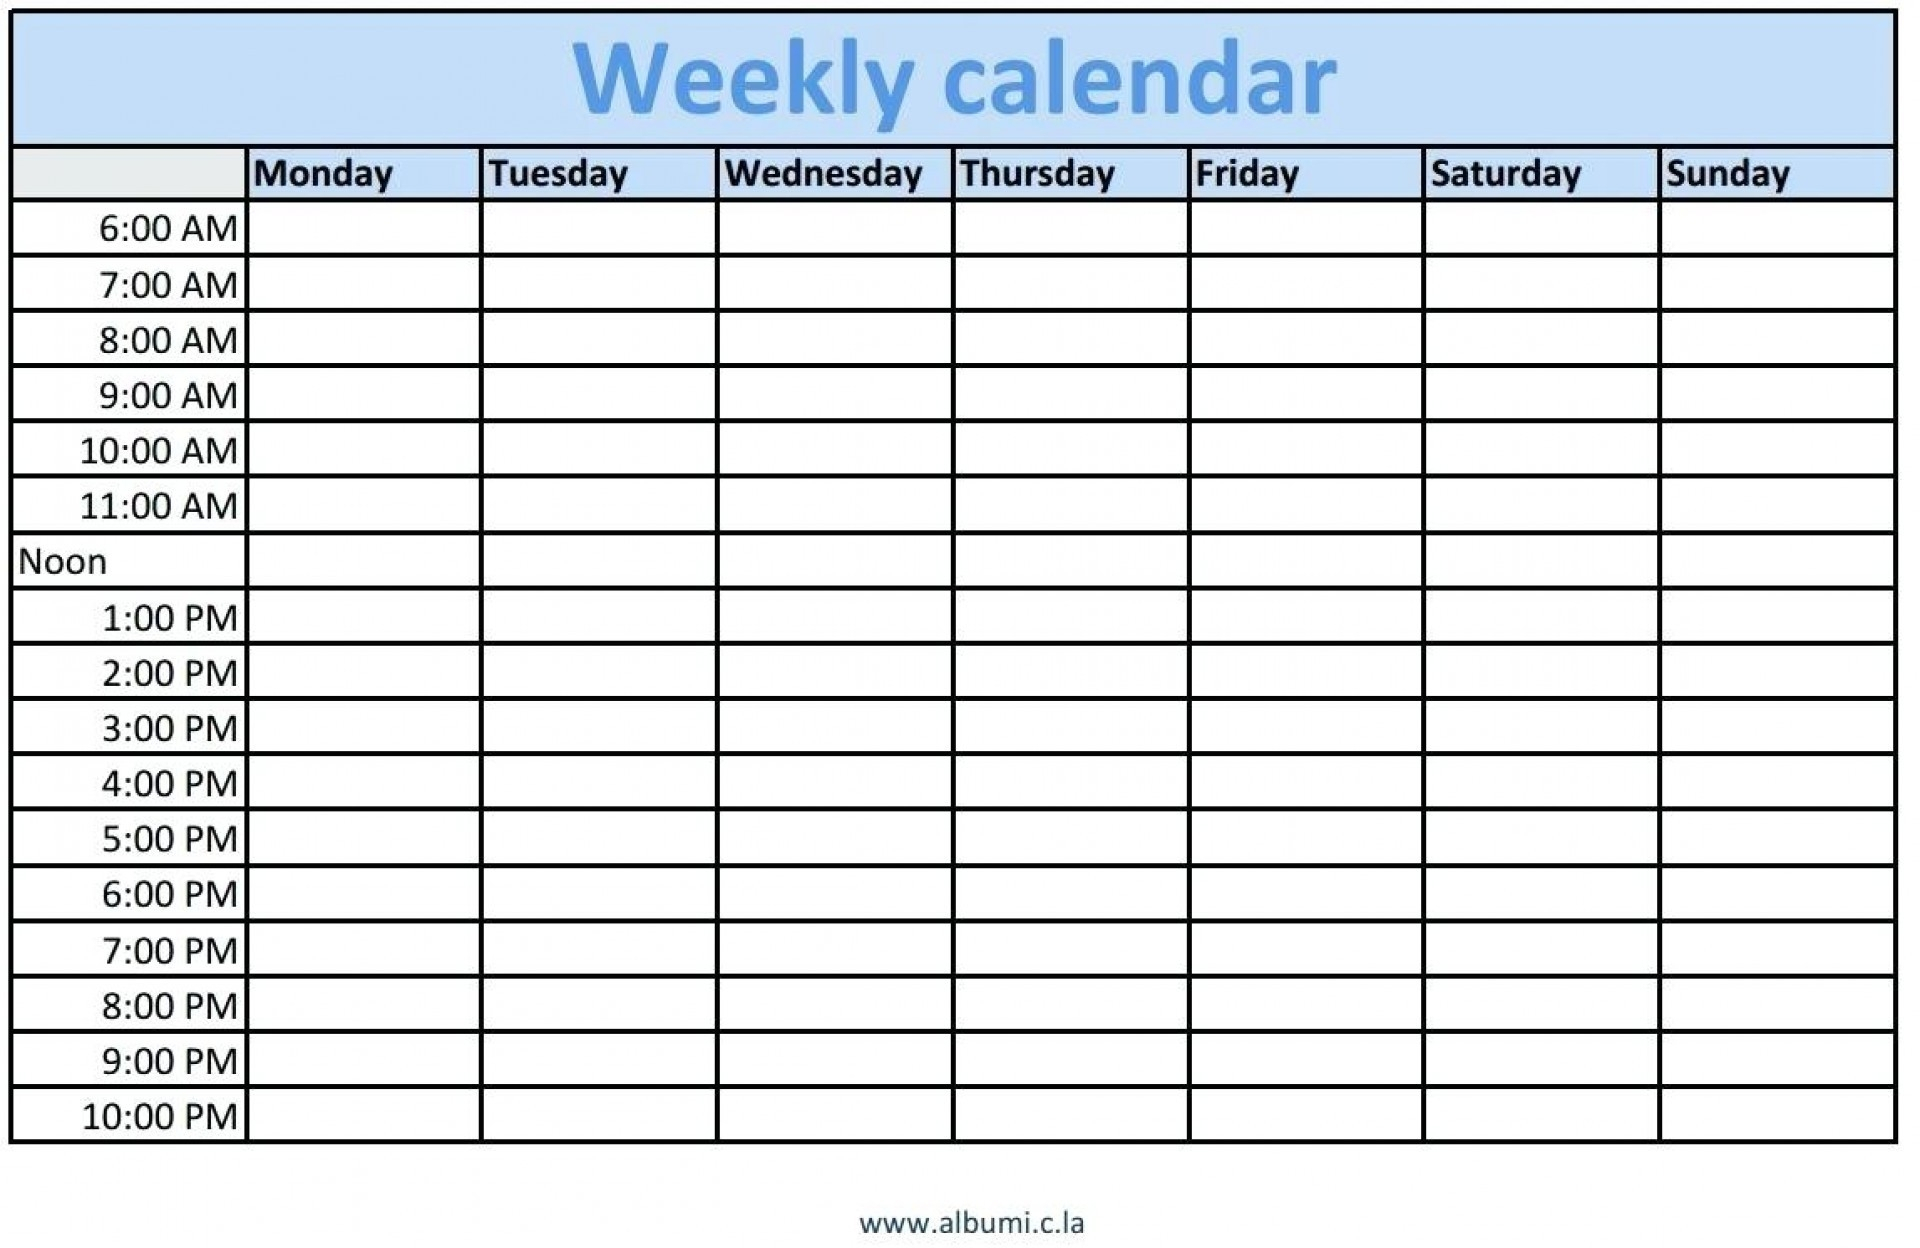 Blank Schedule Template With Time Slots | Example Calendar regarding Calendar With Time Slots Printable